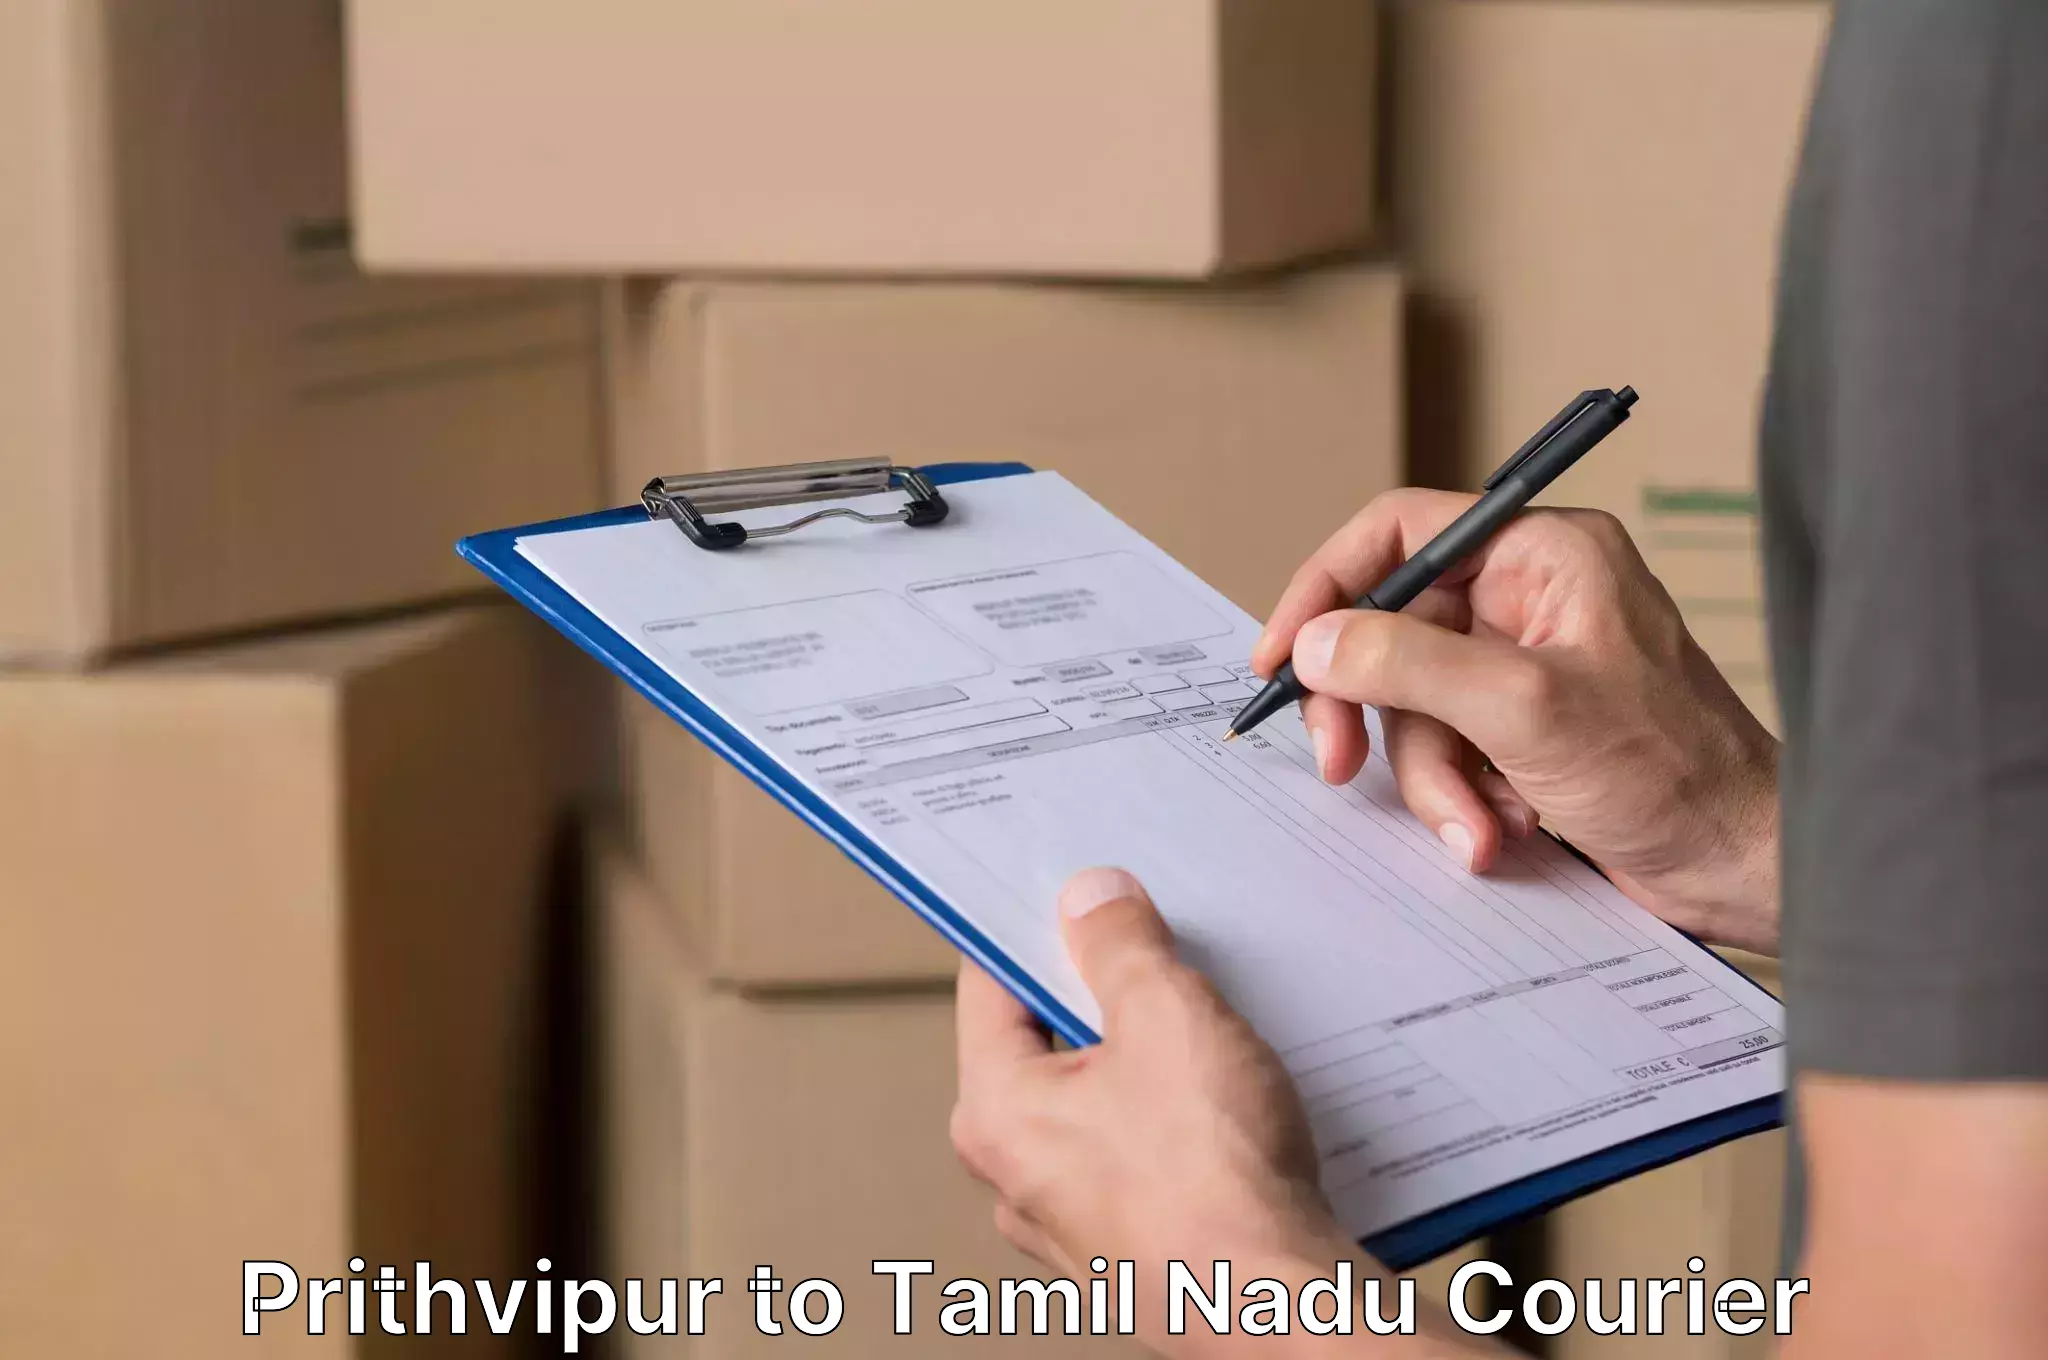 Trusted moving company Prithvipur to Chennai